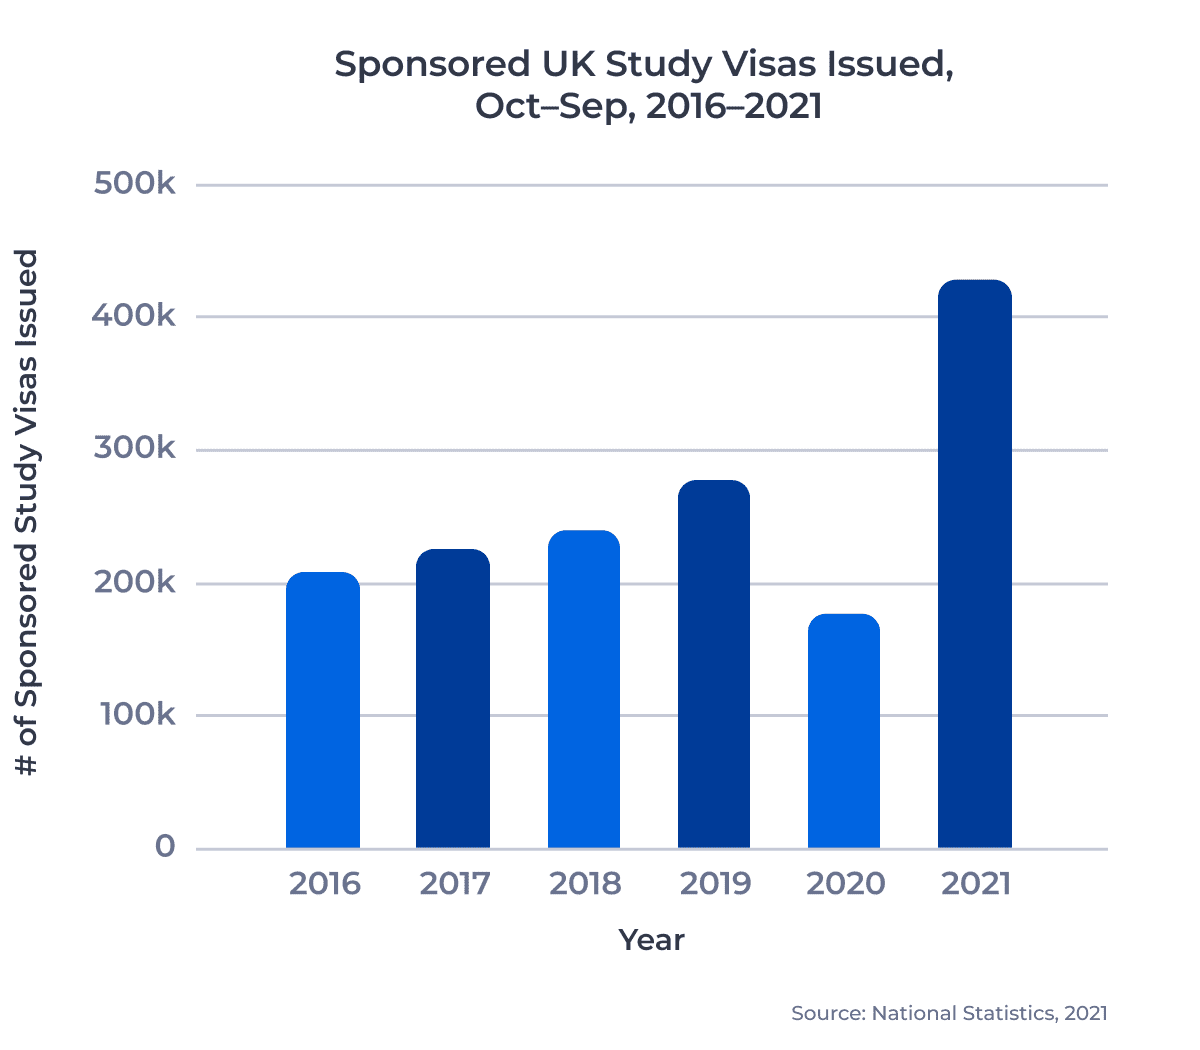 Bar chart showing the number of sponsored UK study visas issued, year ending September, from 2016 to 2021.